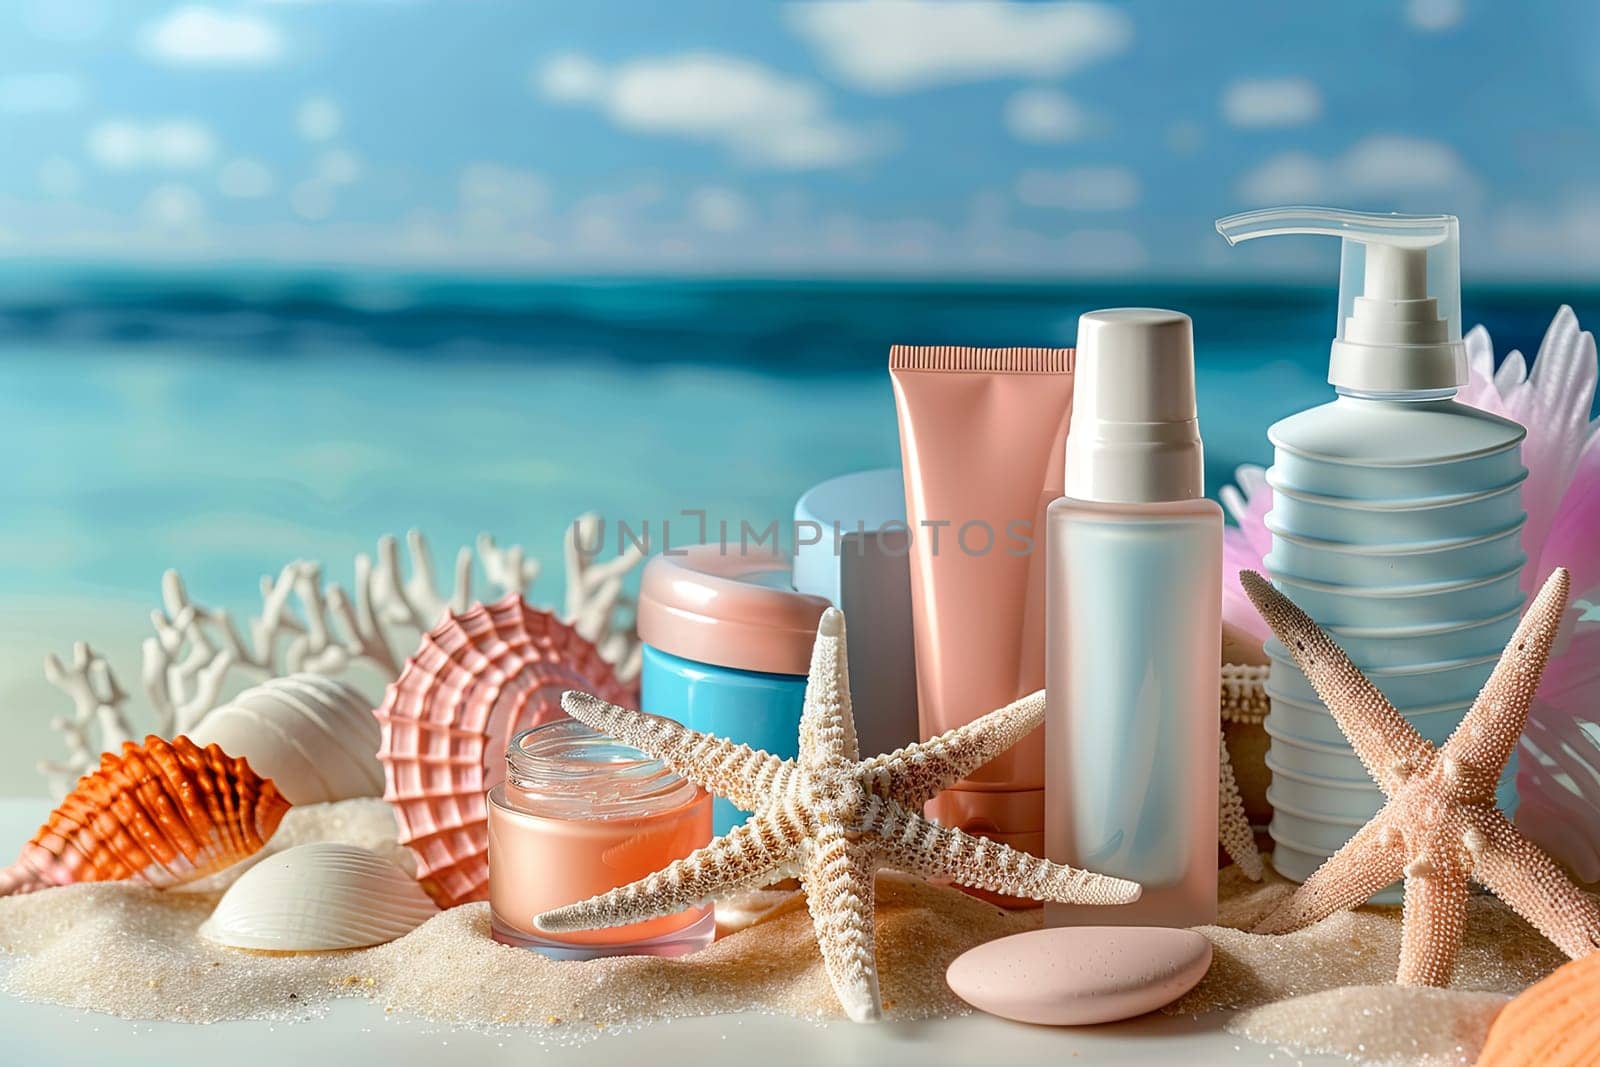 Various items scattered on a sandy beach with a seascape backdrop.